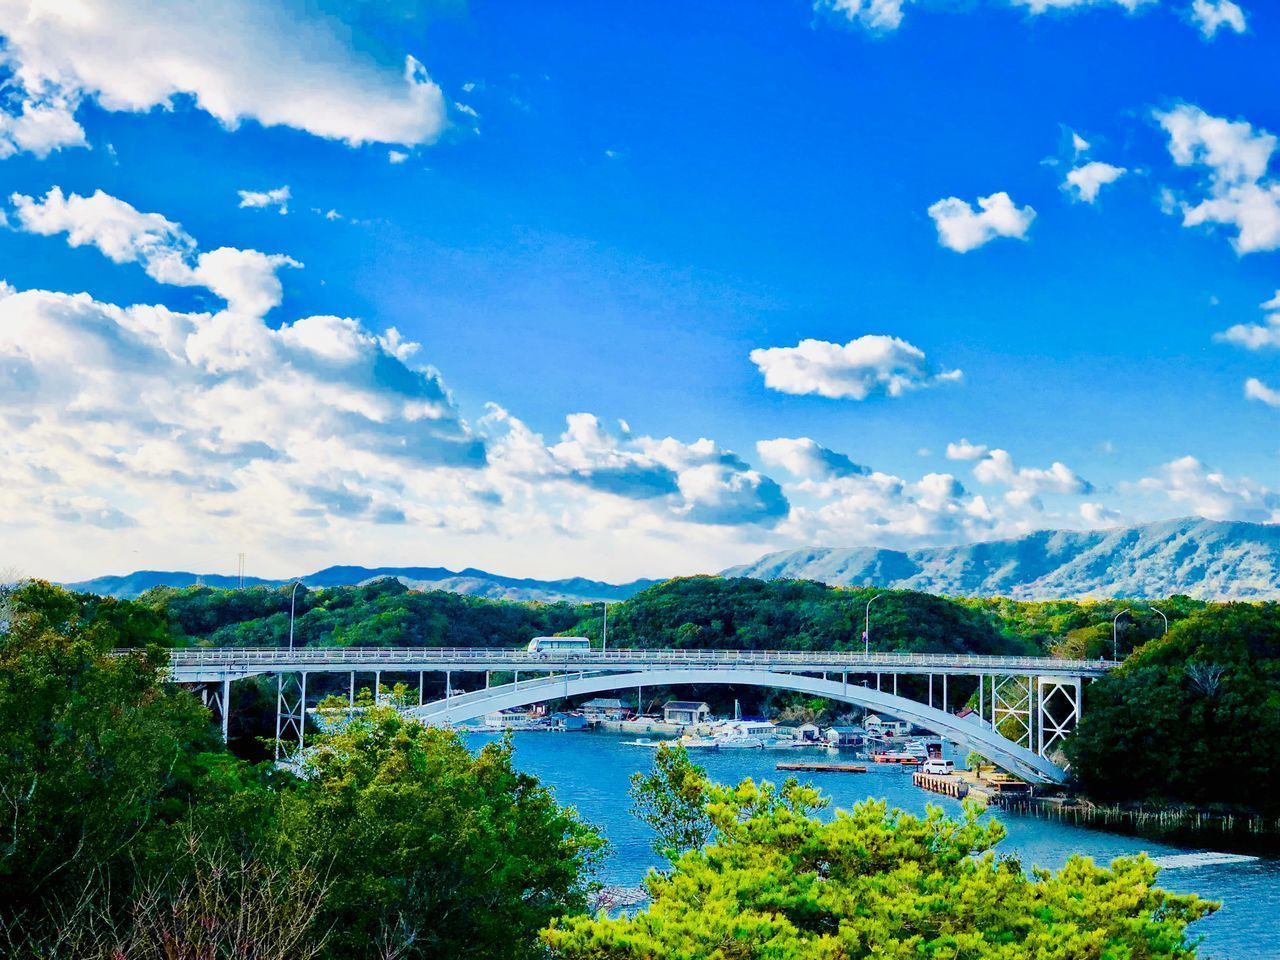 VIEW OF BRIDGE OVER RIVER AGAINST SKY